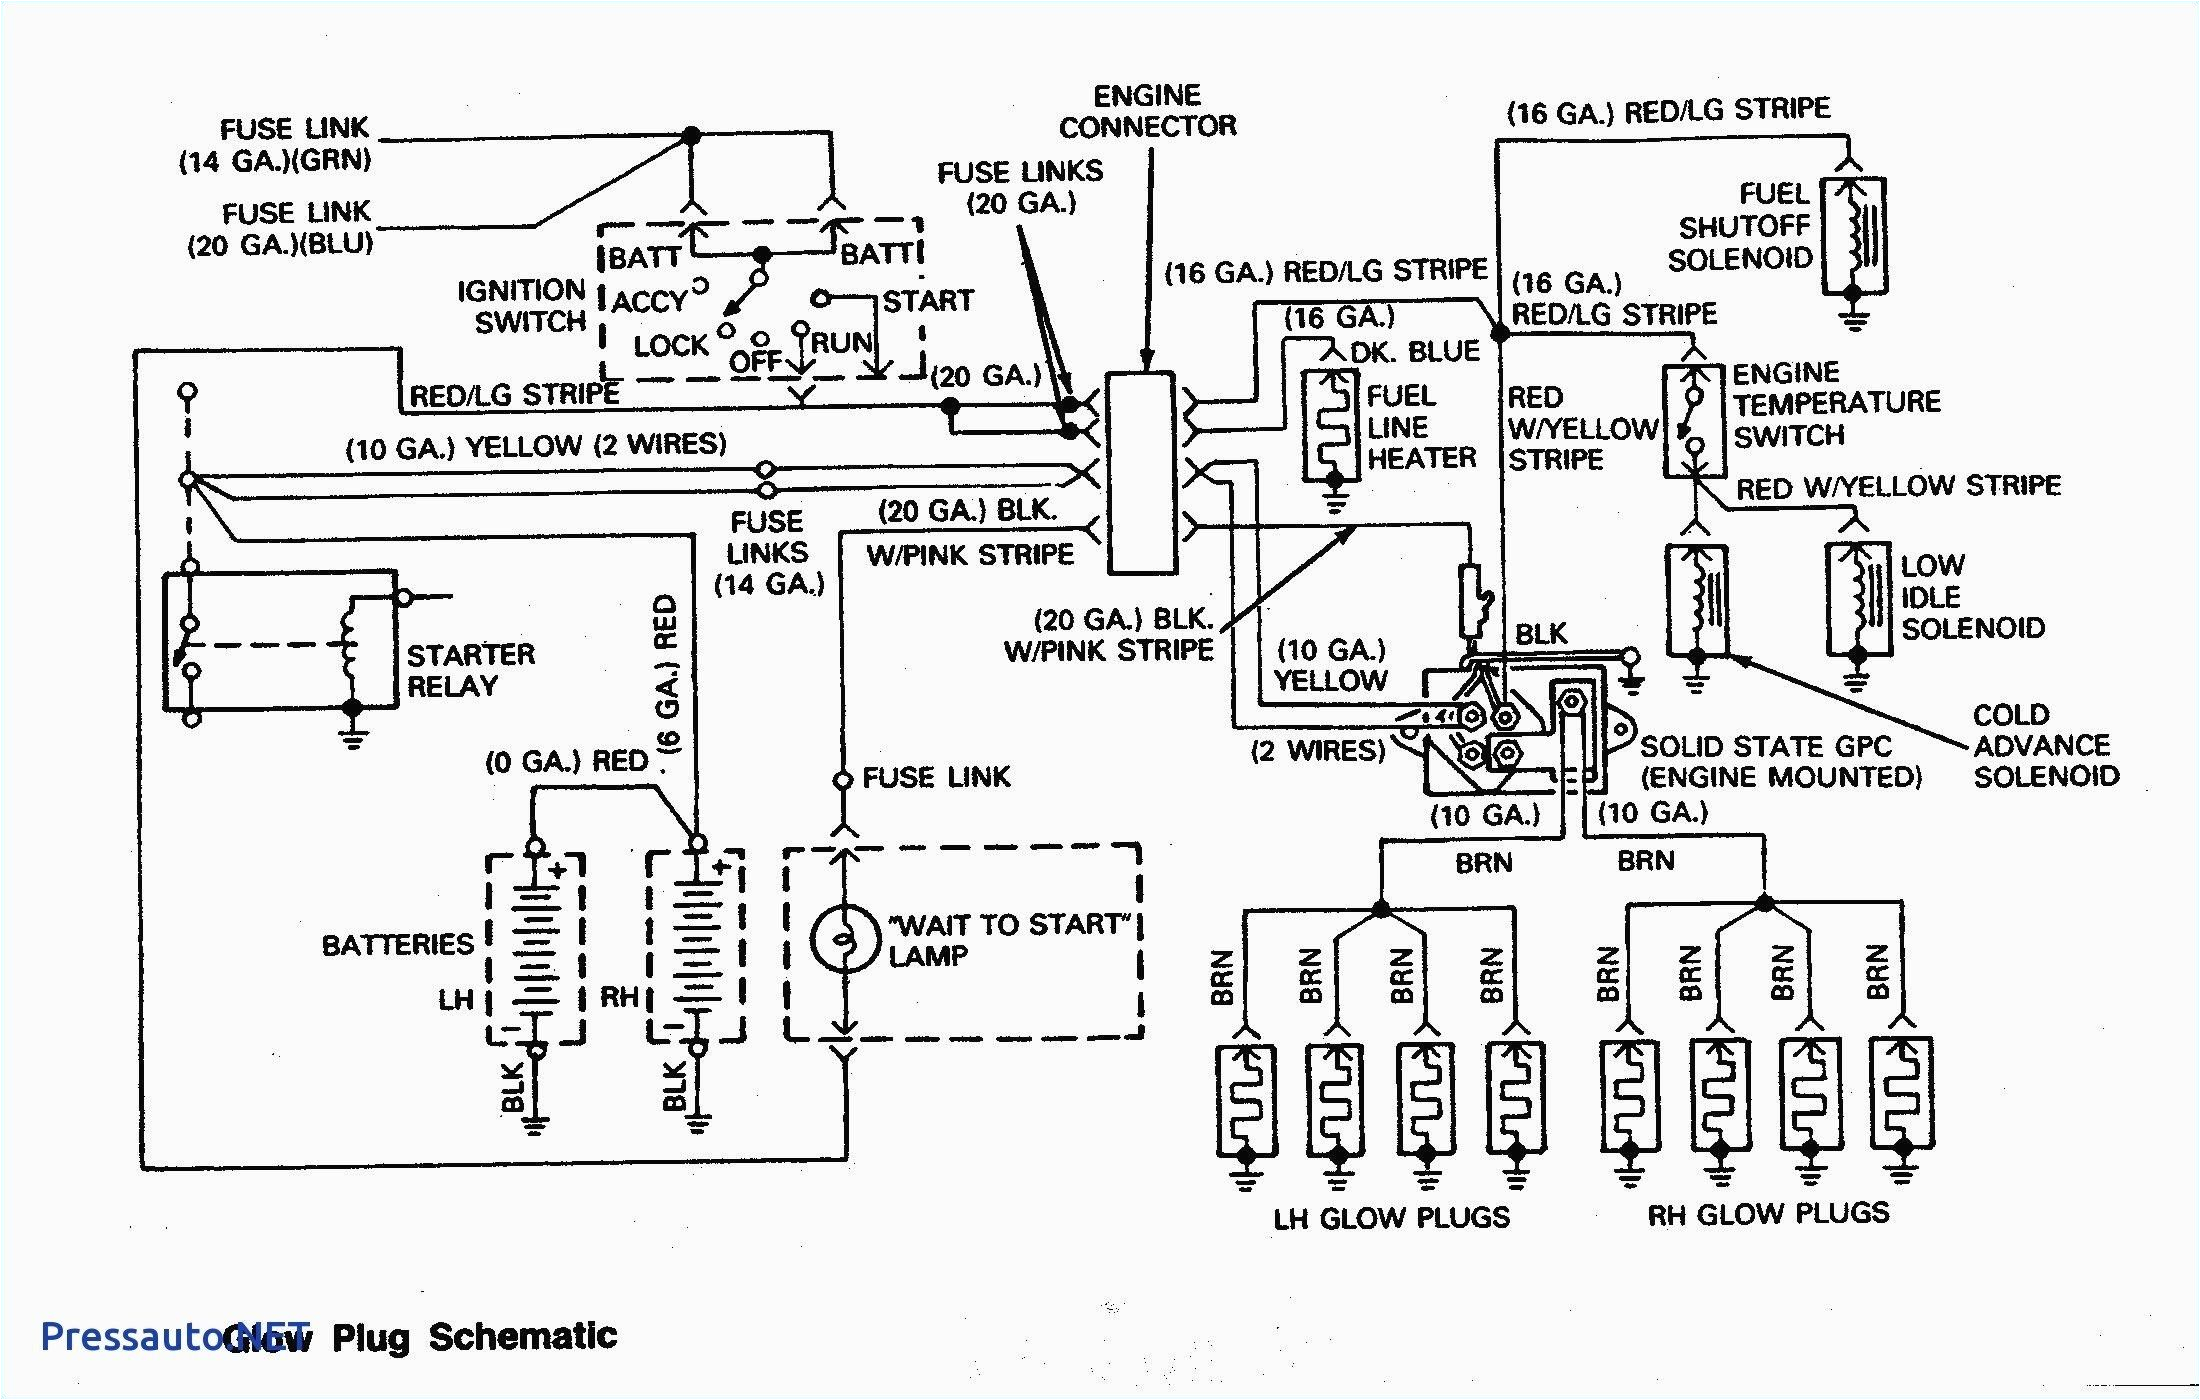 wiring diagram for a glow plug relay wire diagram database wiring diagram for glow plug relay 7 3